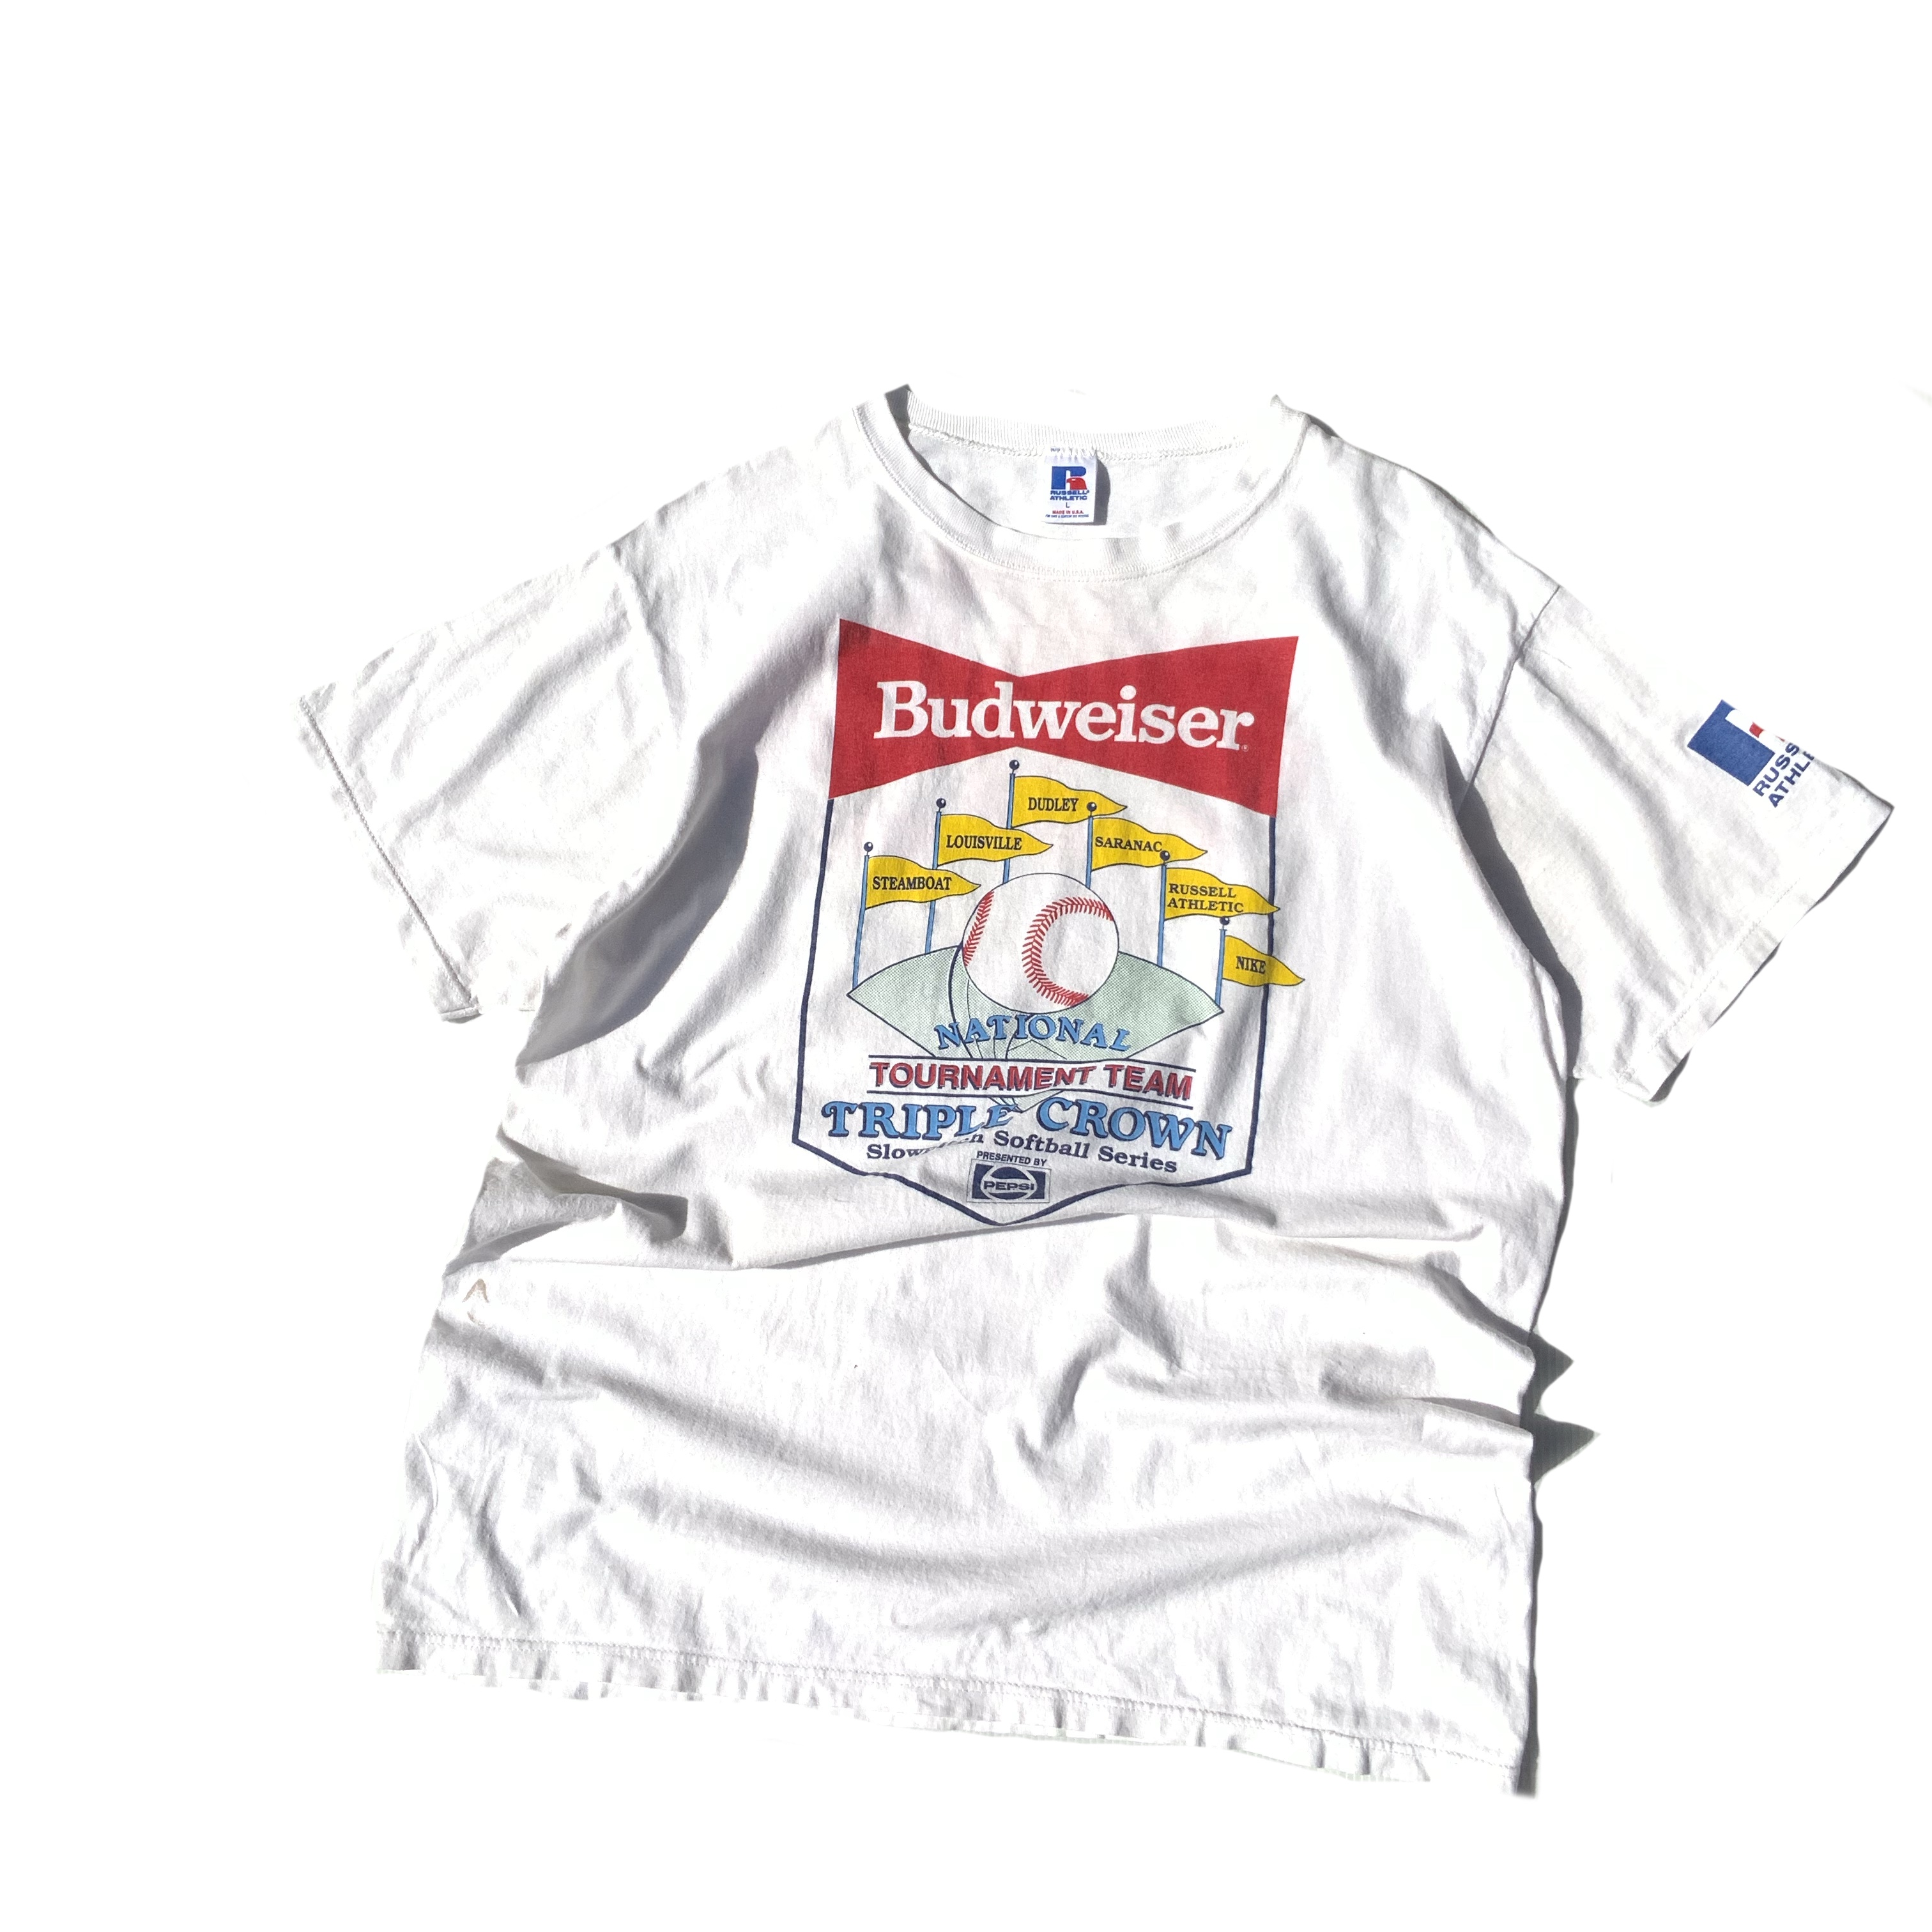 Budweiser x PEPSI x Russell Athletic s Size L 企業物